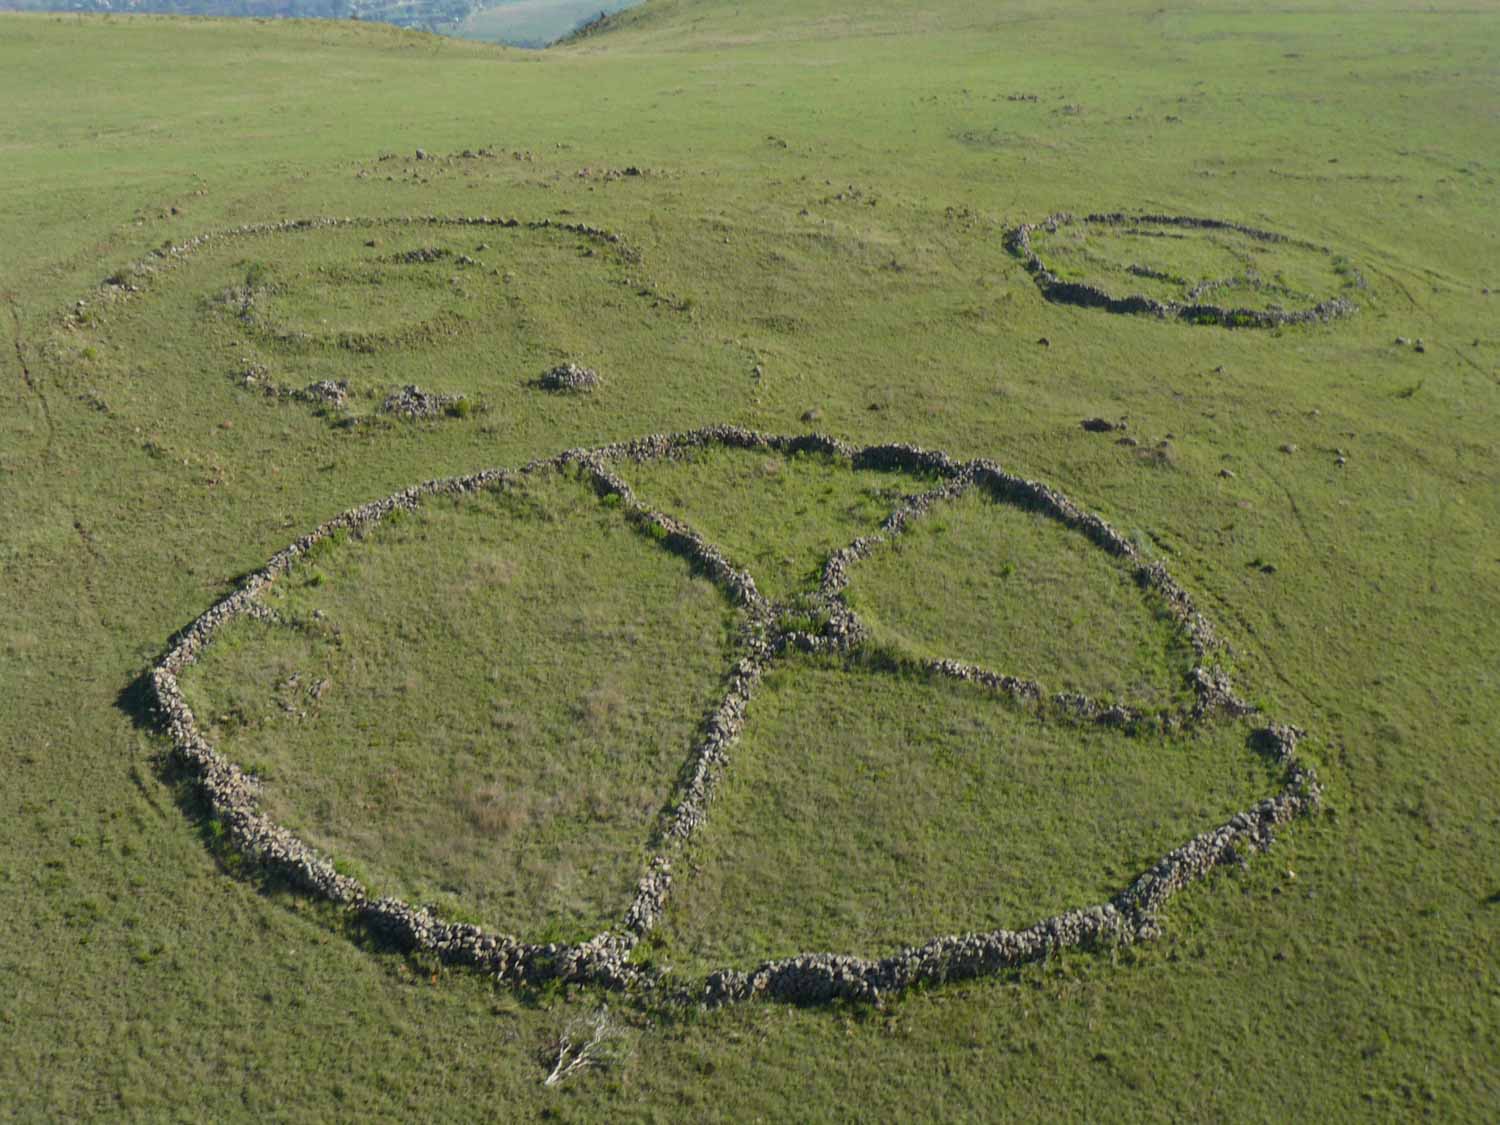 South African Stone Circles